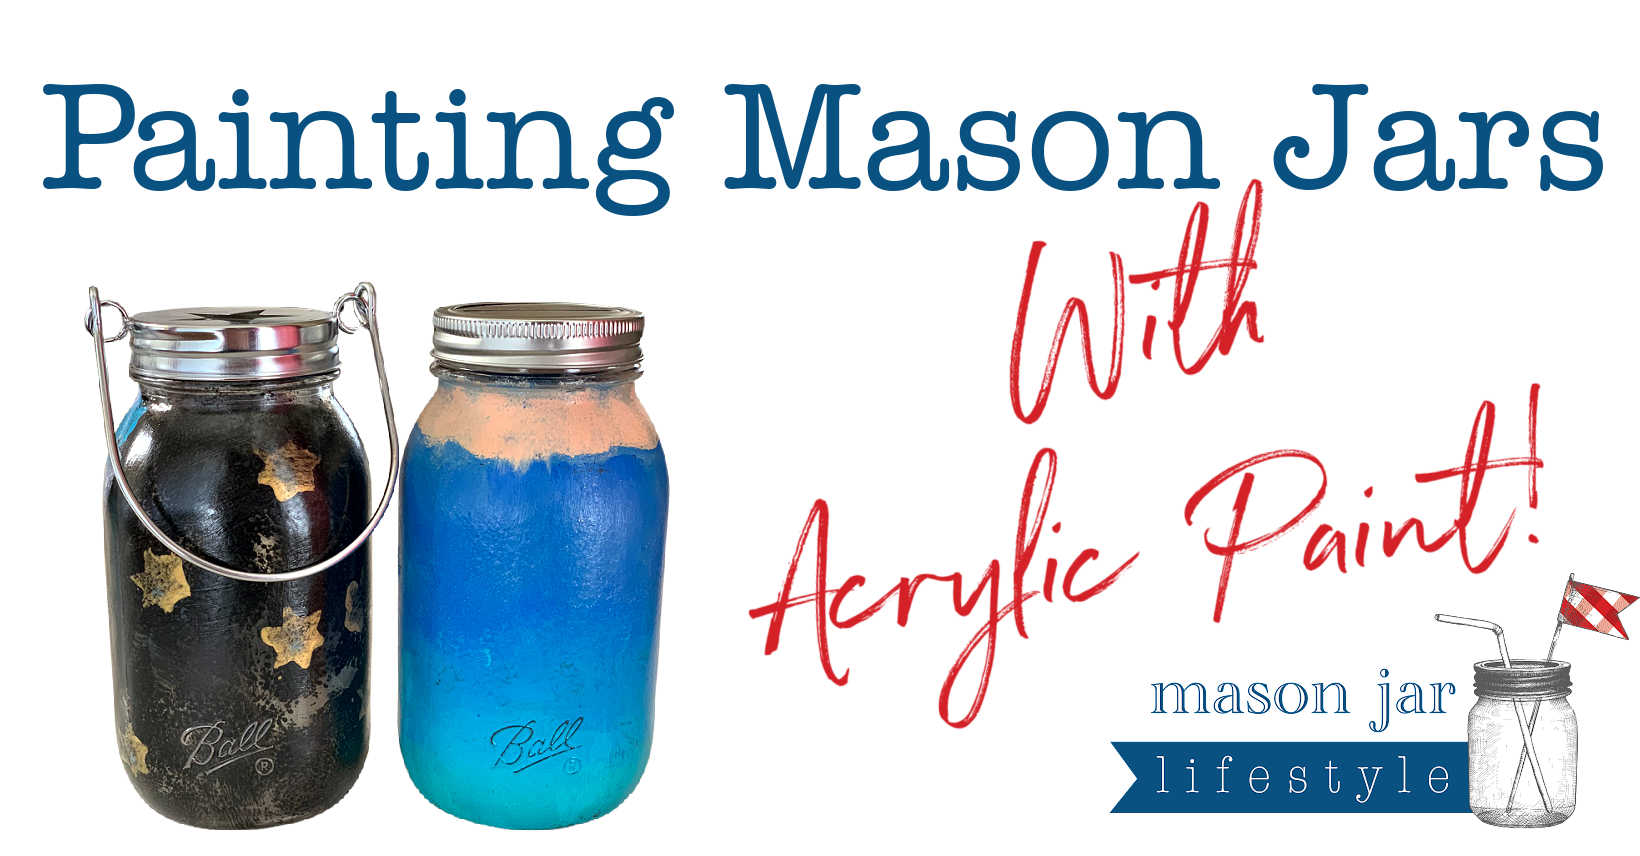 Painting Mason Jars with Acrylic Paint fun crafts for kids and adults easy diy gifts simple homemade